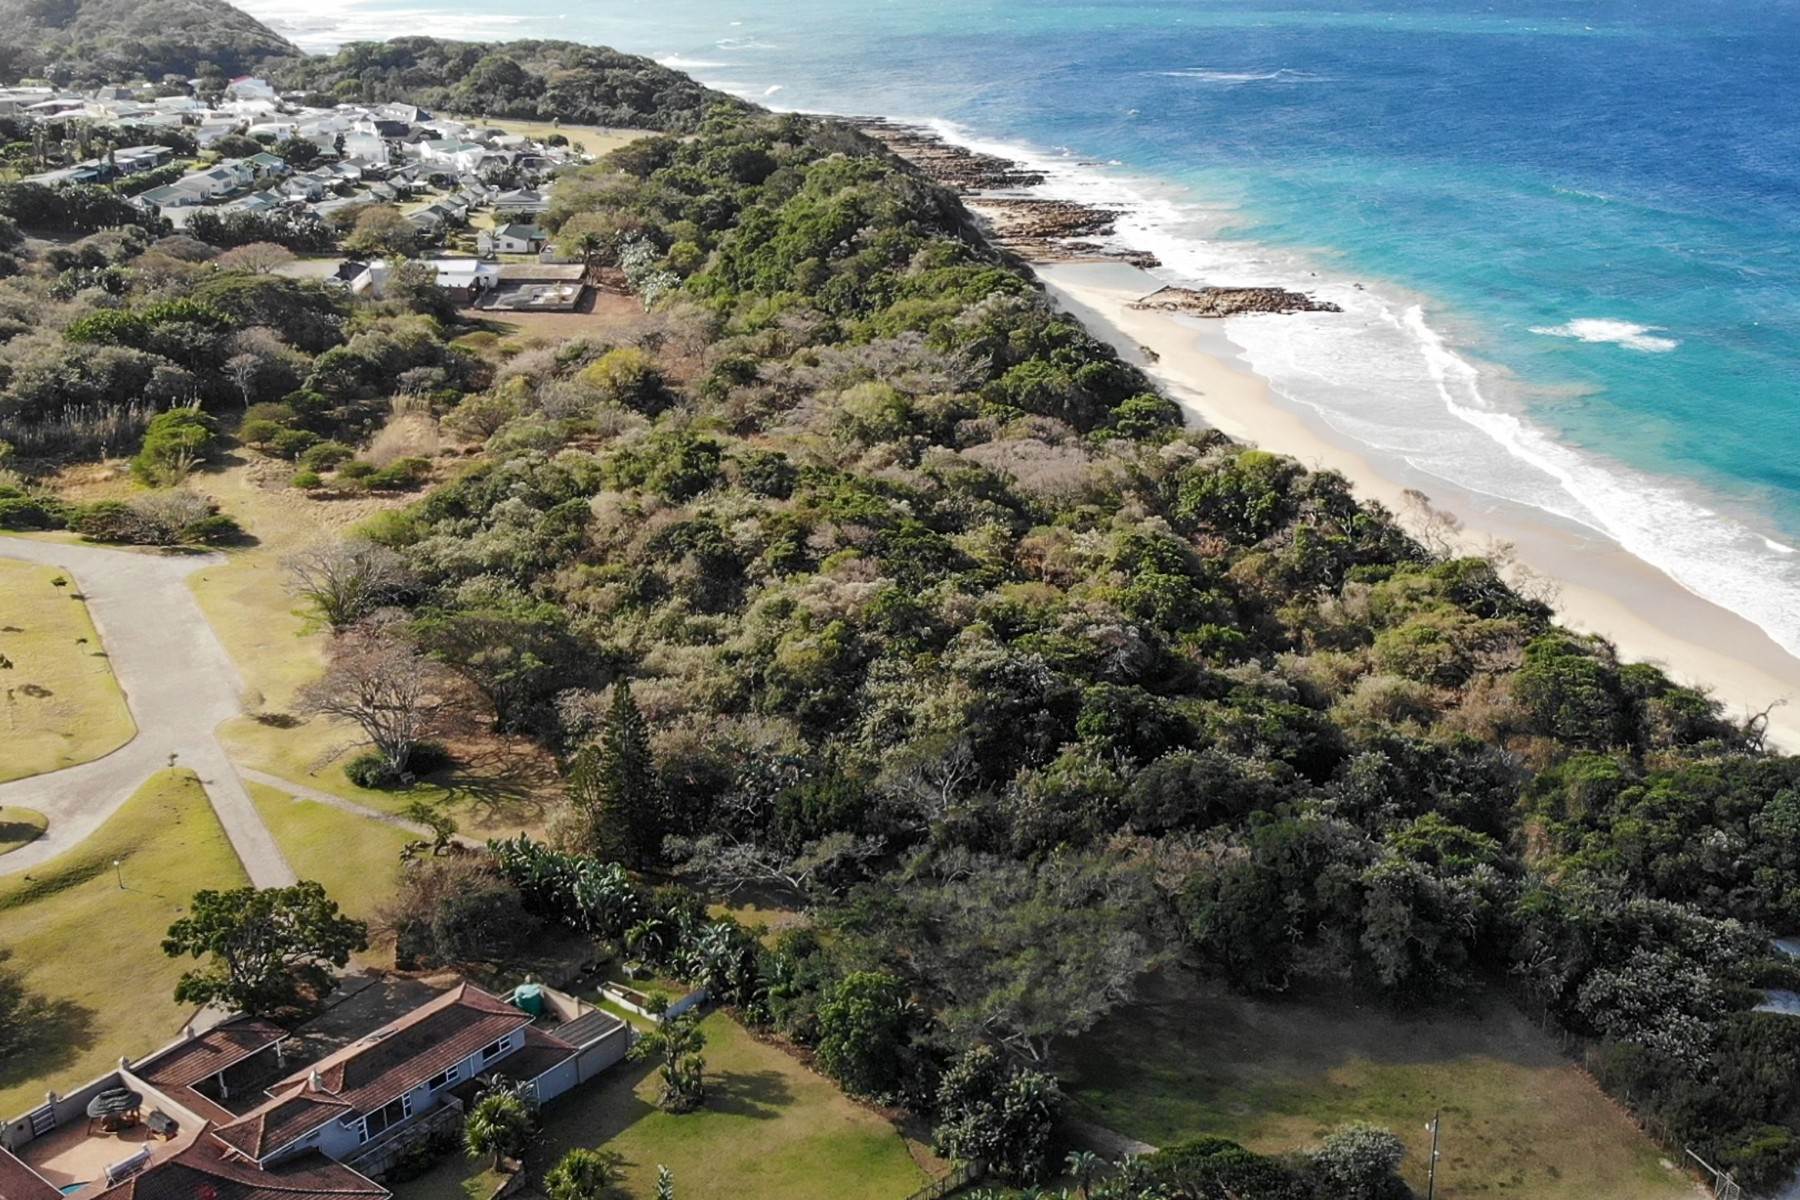 Land for Sale at 1347, Khamanga Bay East London, Eastern Cape 5217 South Africa